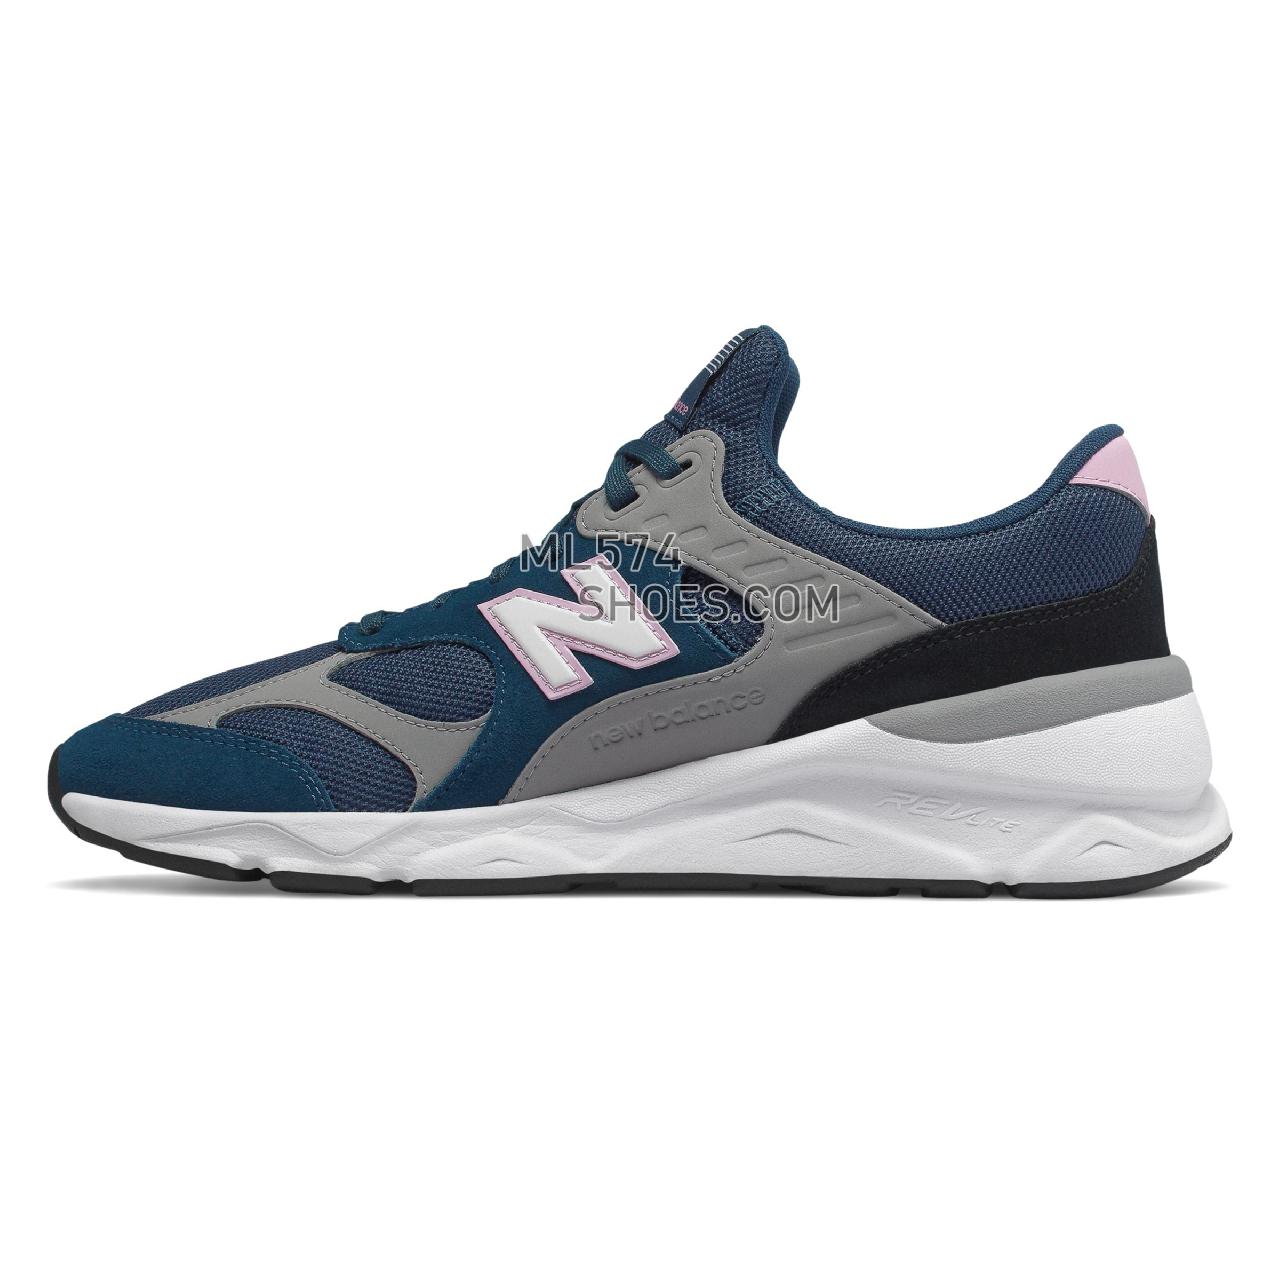 New Balance X-90 - Men's Sport Style Sneakers - North Sea with Team Away Grey - MSX90RCD